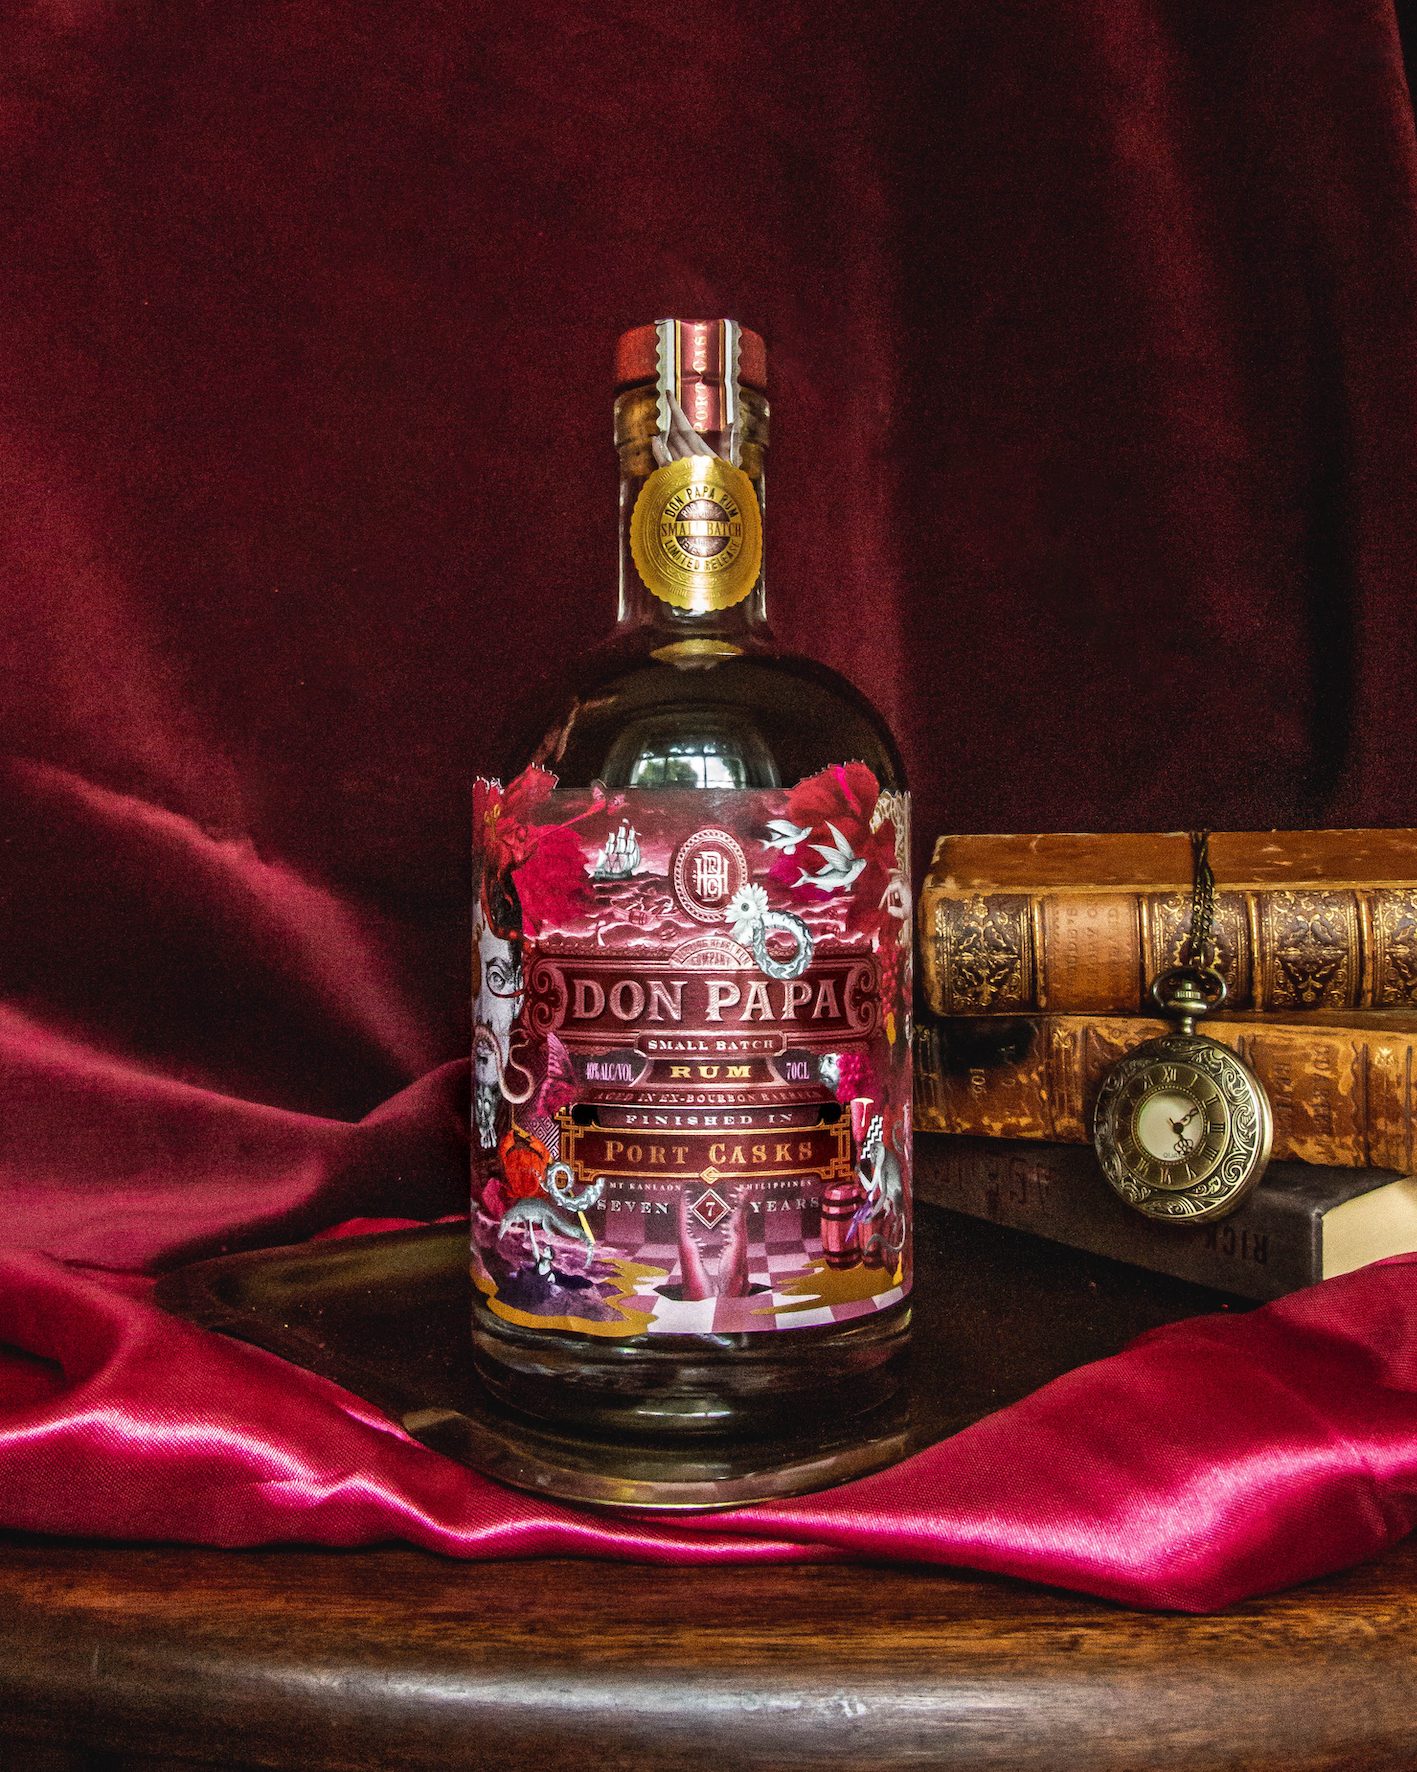 Don Papa's newest limited edition release is the perfect pre-Christmas gift